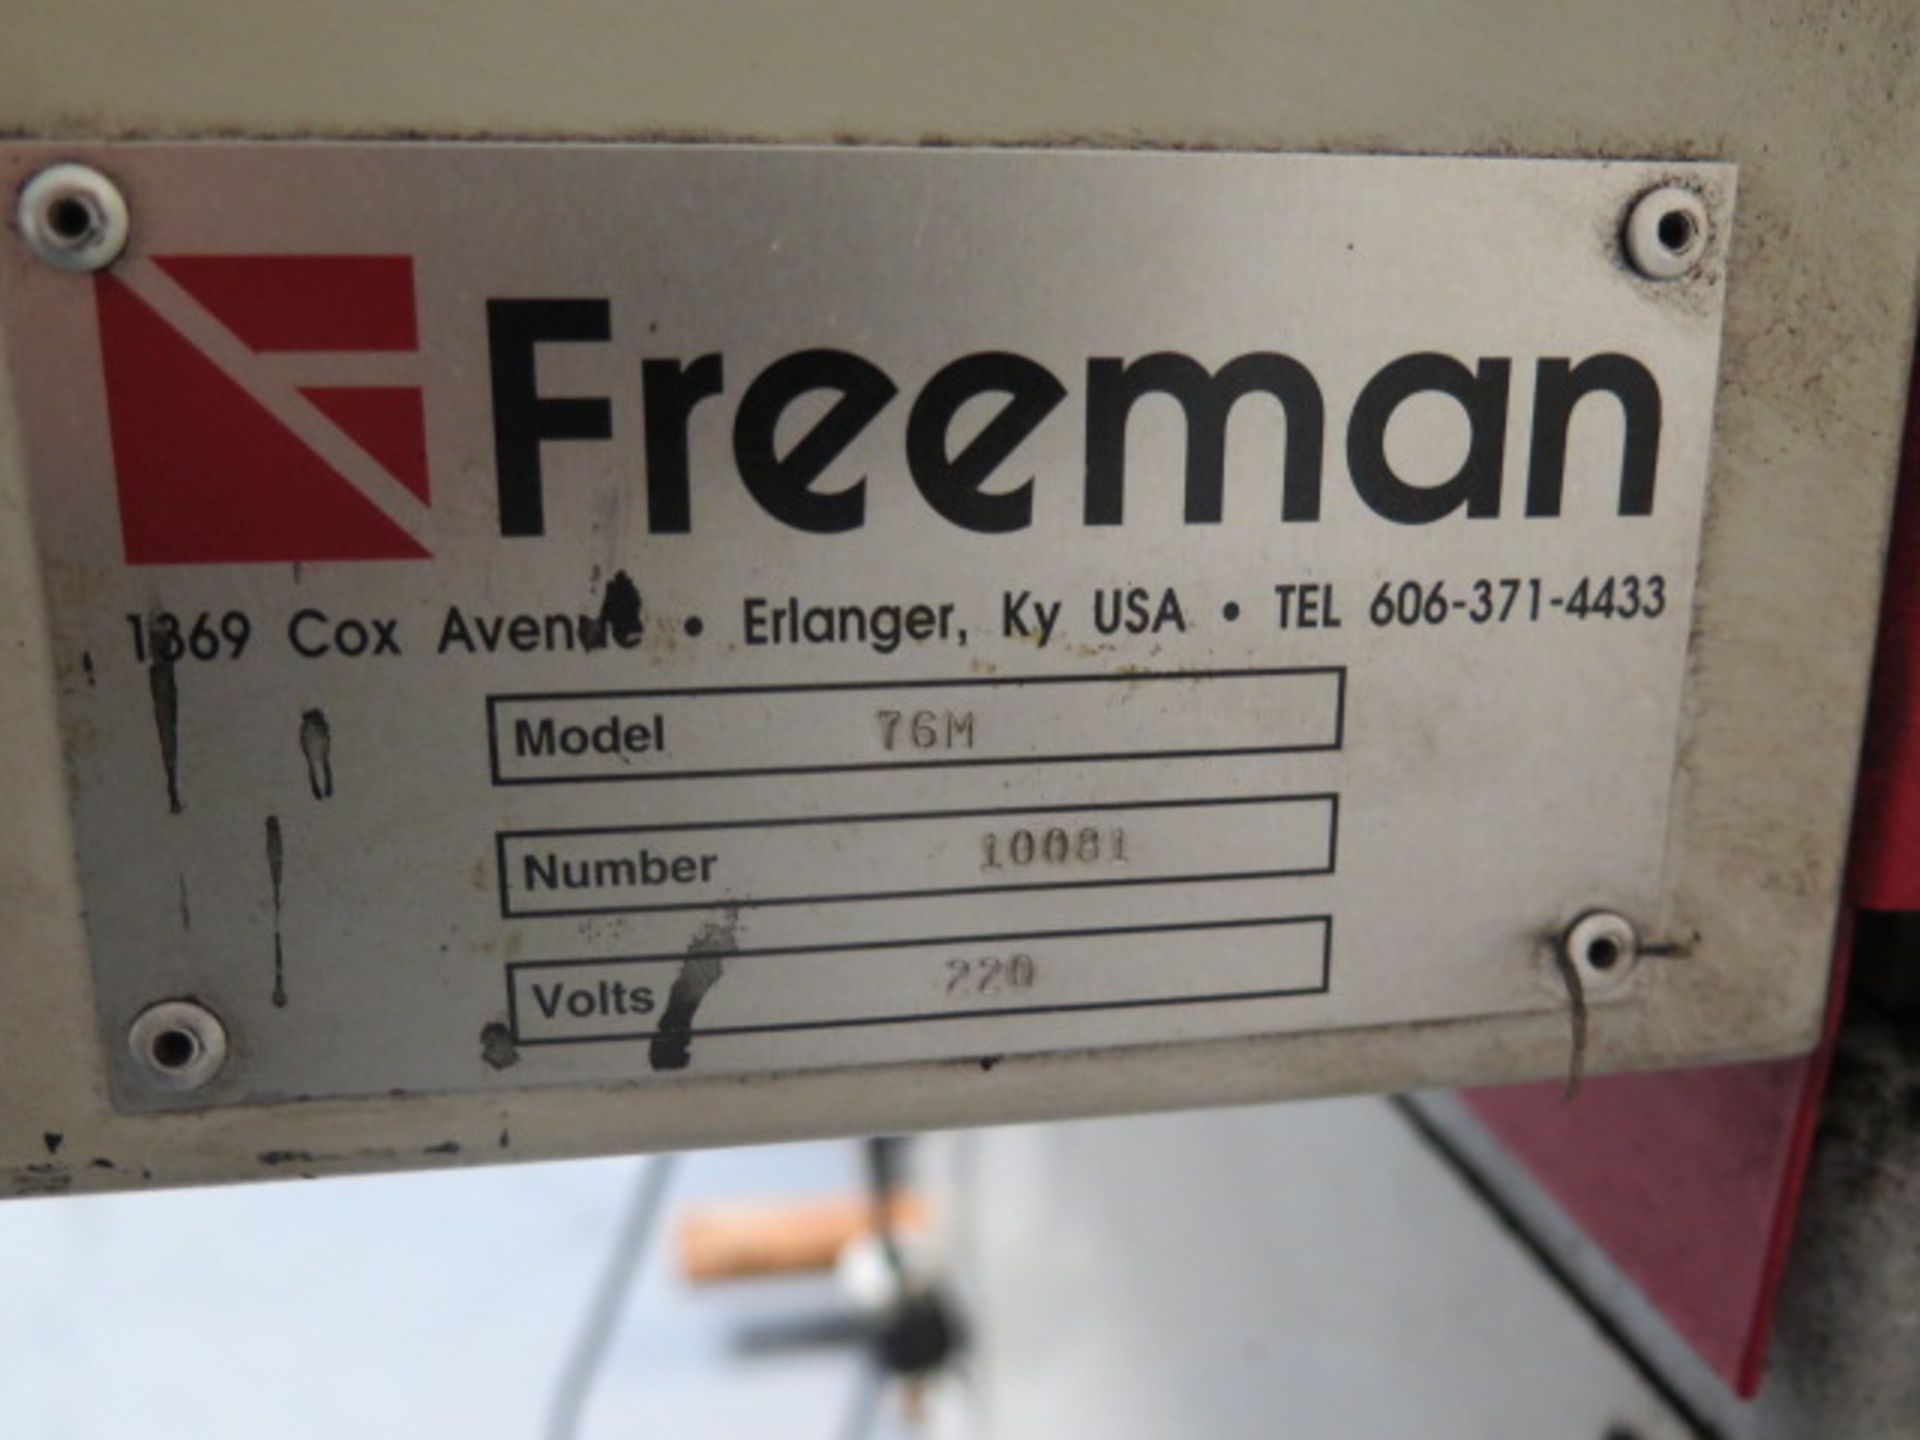 Freeman mdl. 76M Heated Platen Press (Embossing) w/ 20” x 31” Bolster, 12” x 15 ¼” Ram, SOLD AS IS - Image 10 of 10